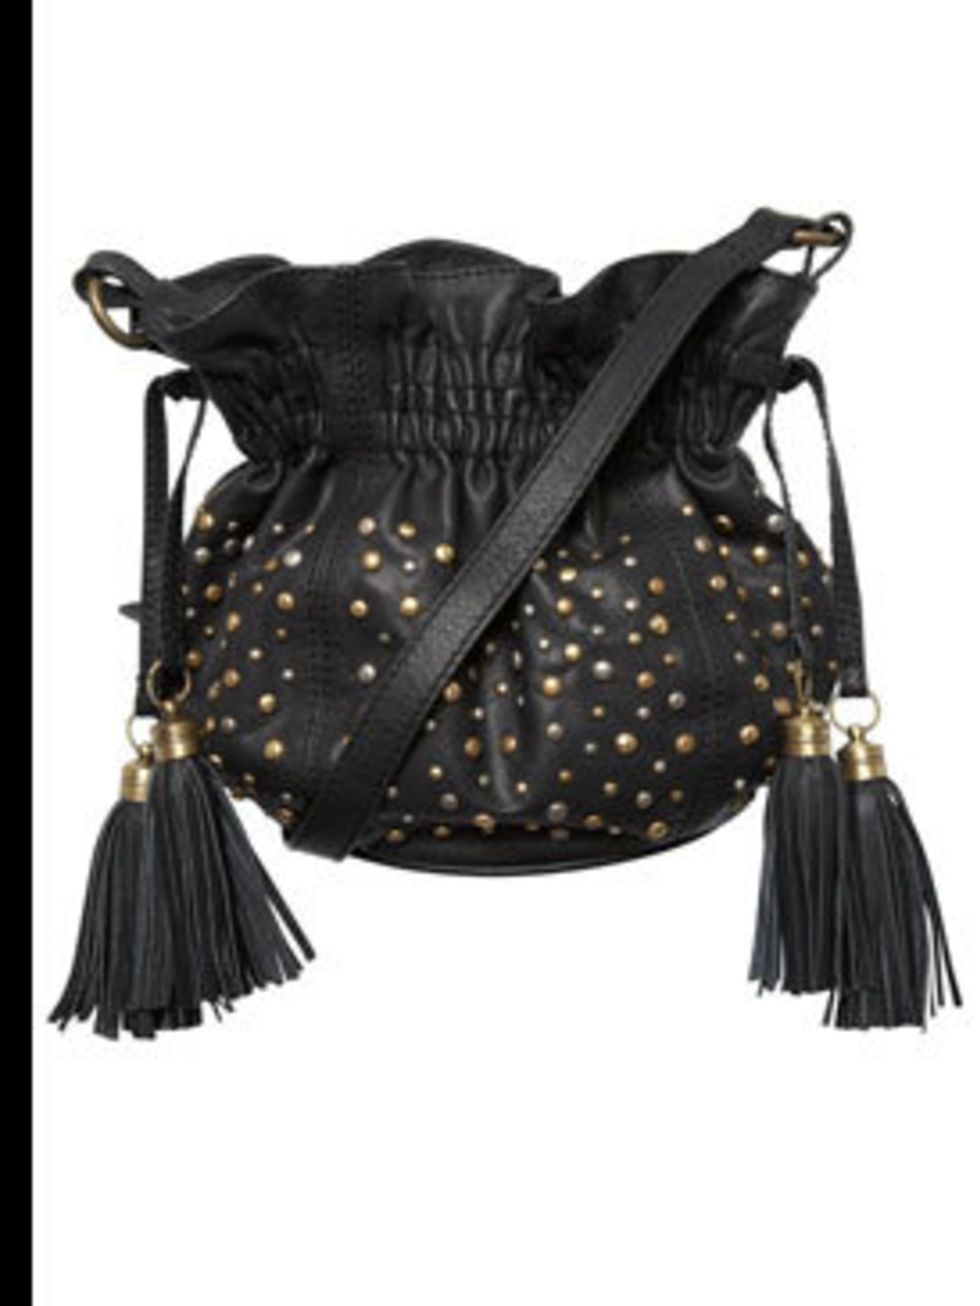 <p>Black bucket bag, £40, by <a href="http://www.oasis-stores.com/pws/Home.ice">Oasis</a></p>